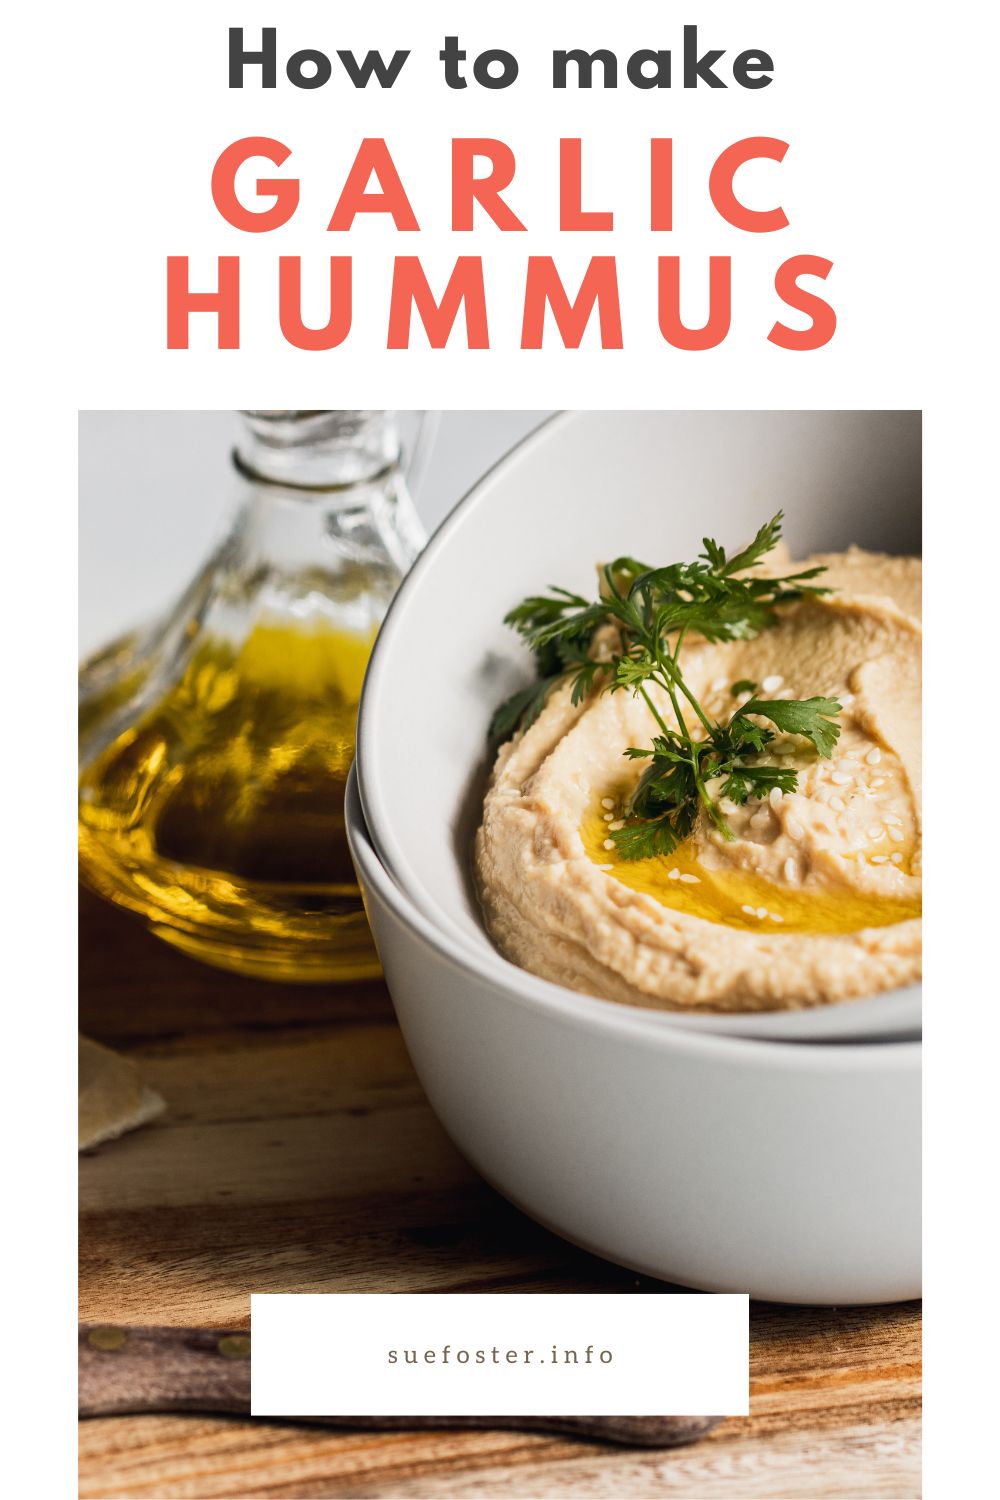 Make flavourful garlic hummus easily. Roast or use raw garlic. Serve with pita bread or fresh veggies for a quick, tasty snack!